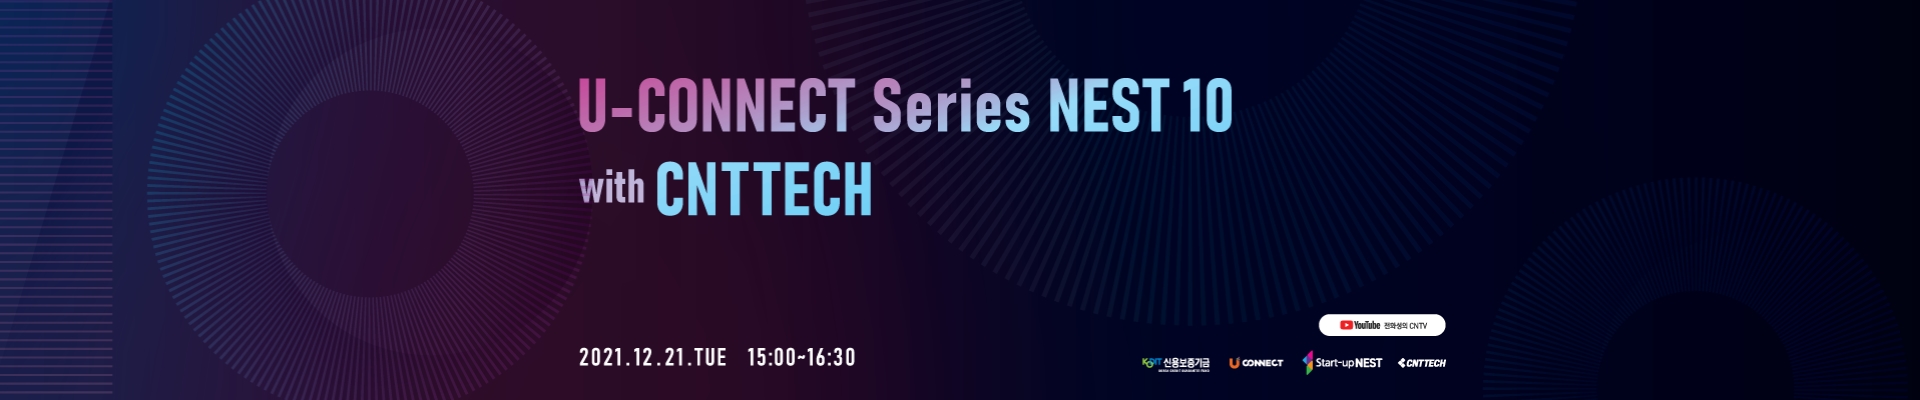 U-CONNECT Series NEST10 with. CNTTECH